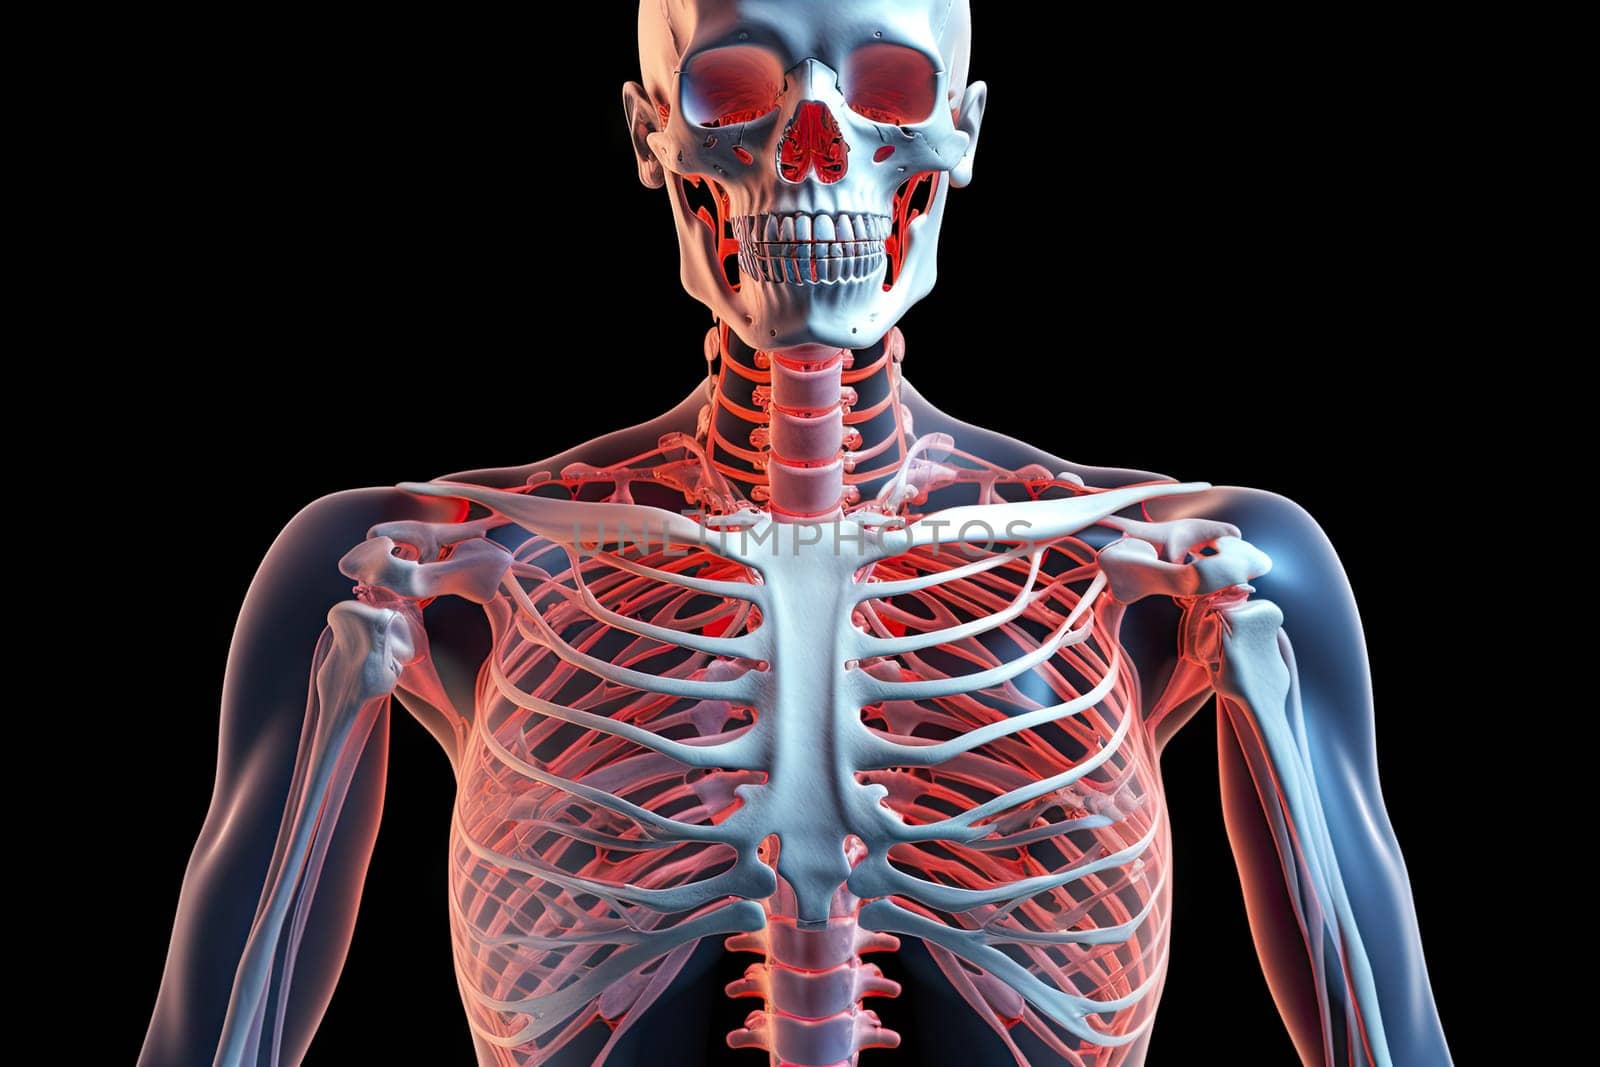 A skeleton is shown in this image created with generative AI technology by golibtolibov